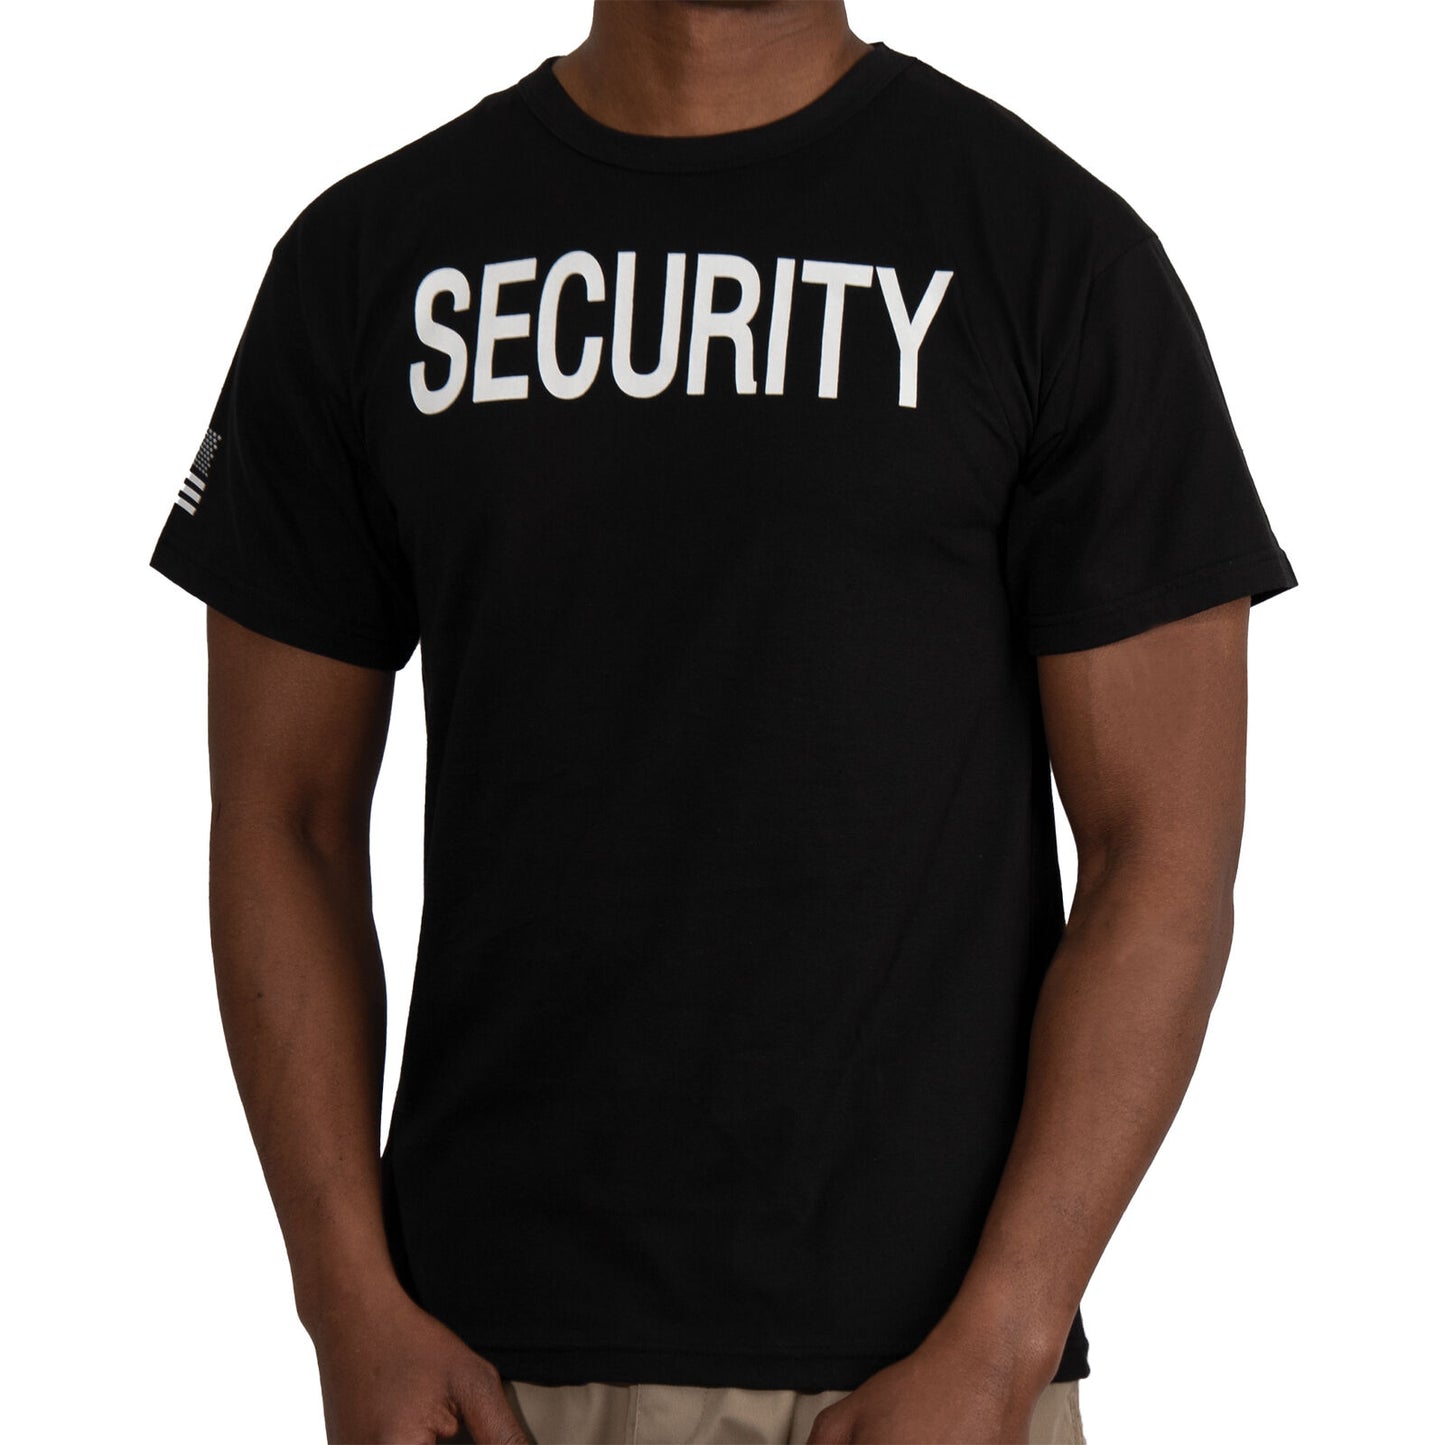 Men's Black 2-Sided "SECURITY" T-Shirt with US Flag On Sleeve